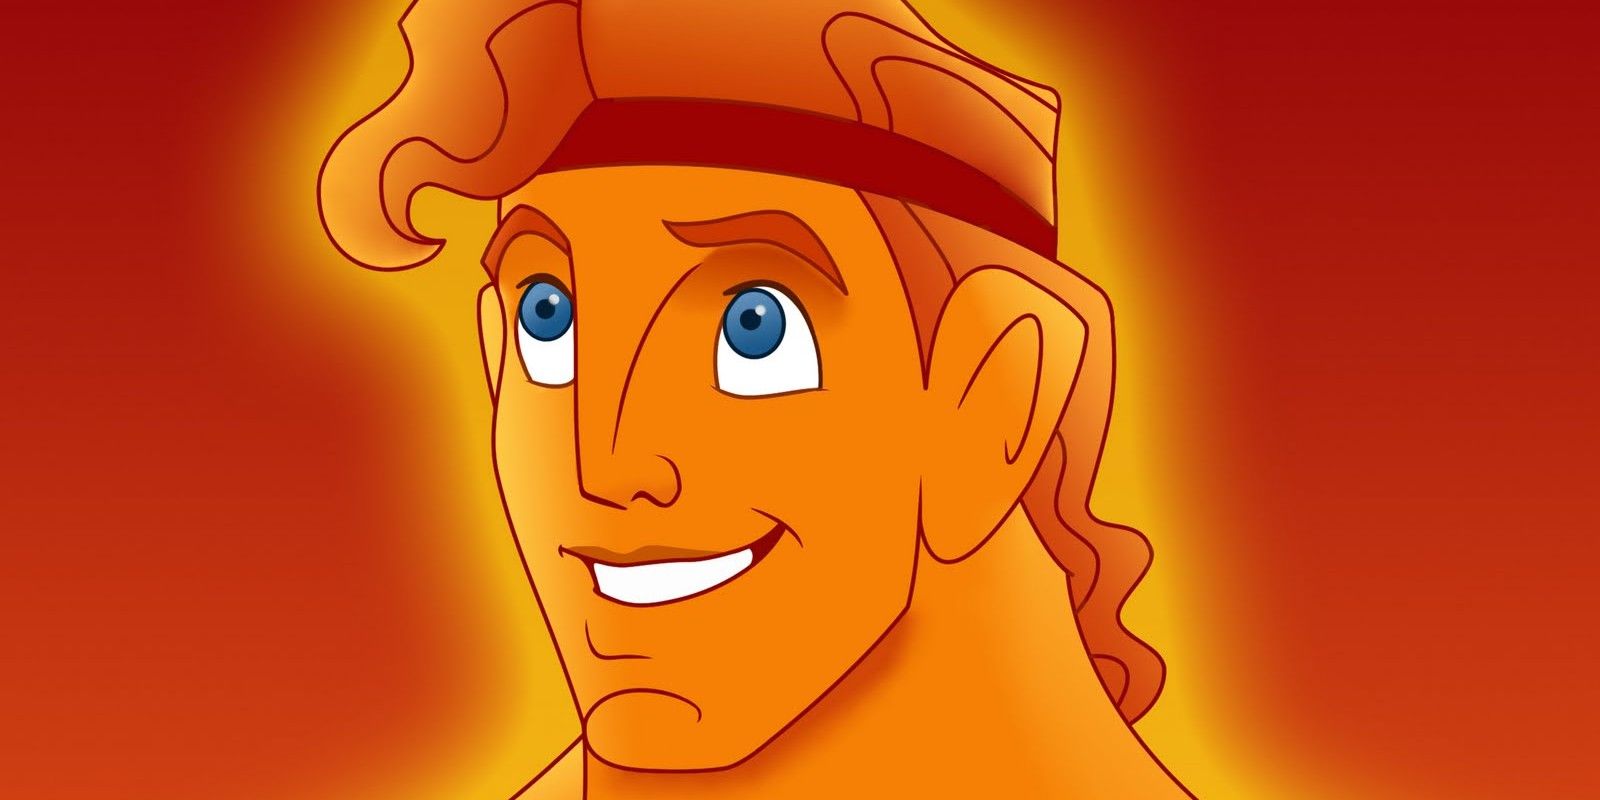 Disney's animated Hercules from 1997 with Hercules smiling against a red background.